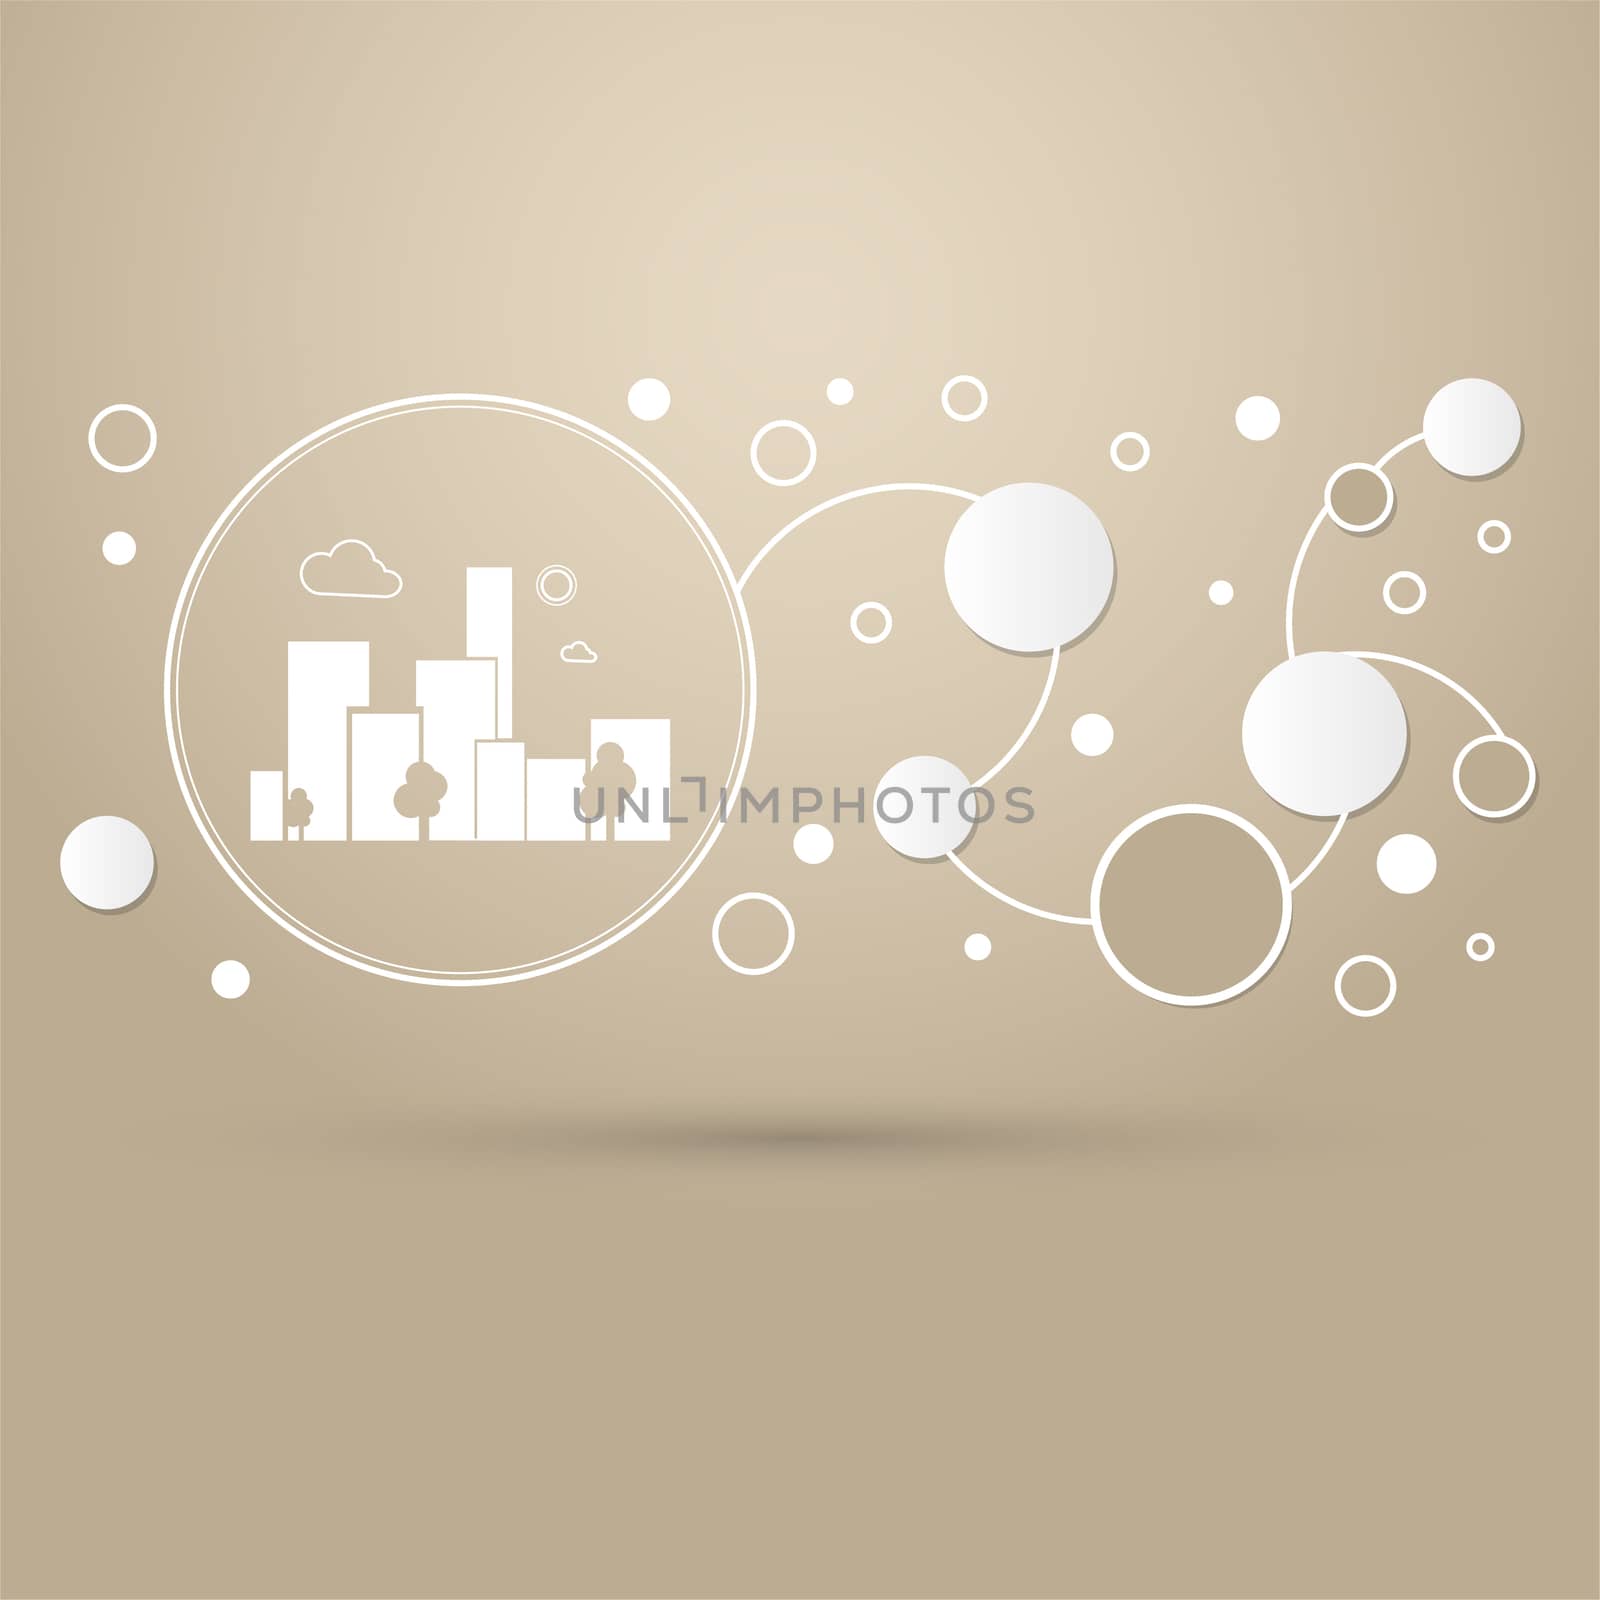 City Icon on a brown background with elegant style and modern design infographic.  by Adamchuk